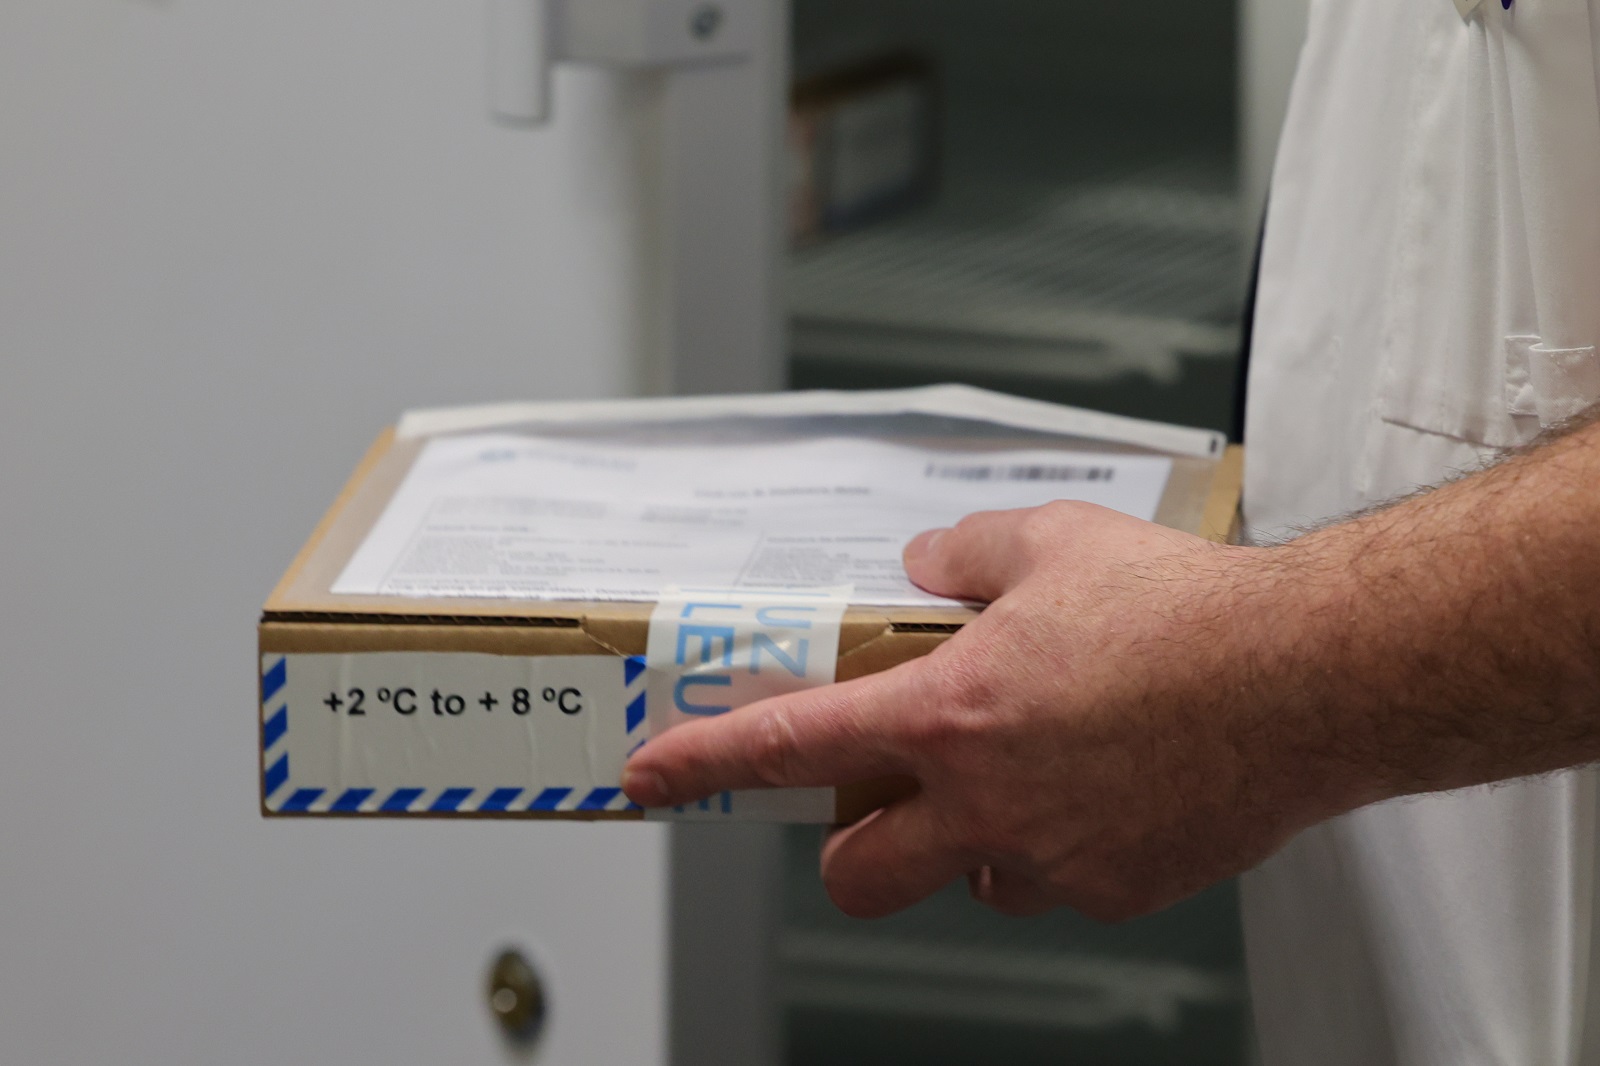 epa08907187 A staff holds a package containing the vaccine as the Covid-19 vaccination campaign continues with the distribution of Pfizer-BioNTech Covid-19 disease vaccines at the UZ Leuven hospital in Leuven, Belgium, 28 December 2020. The thawed mRNA vaccines, along with the syringes, needles and solvent to dissolve the vaccines, are moved to residential care centers in Brussels, Flanders and Wallonia to be administered to residents.  EPA/OLIVIER MATTHYS / POOL